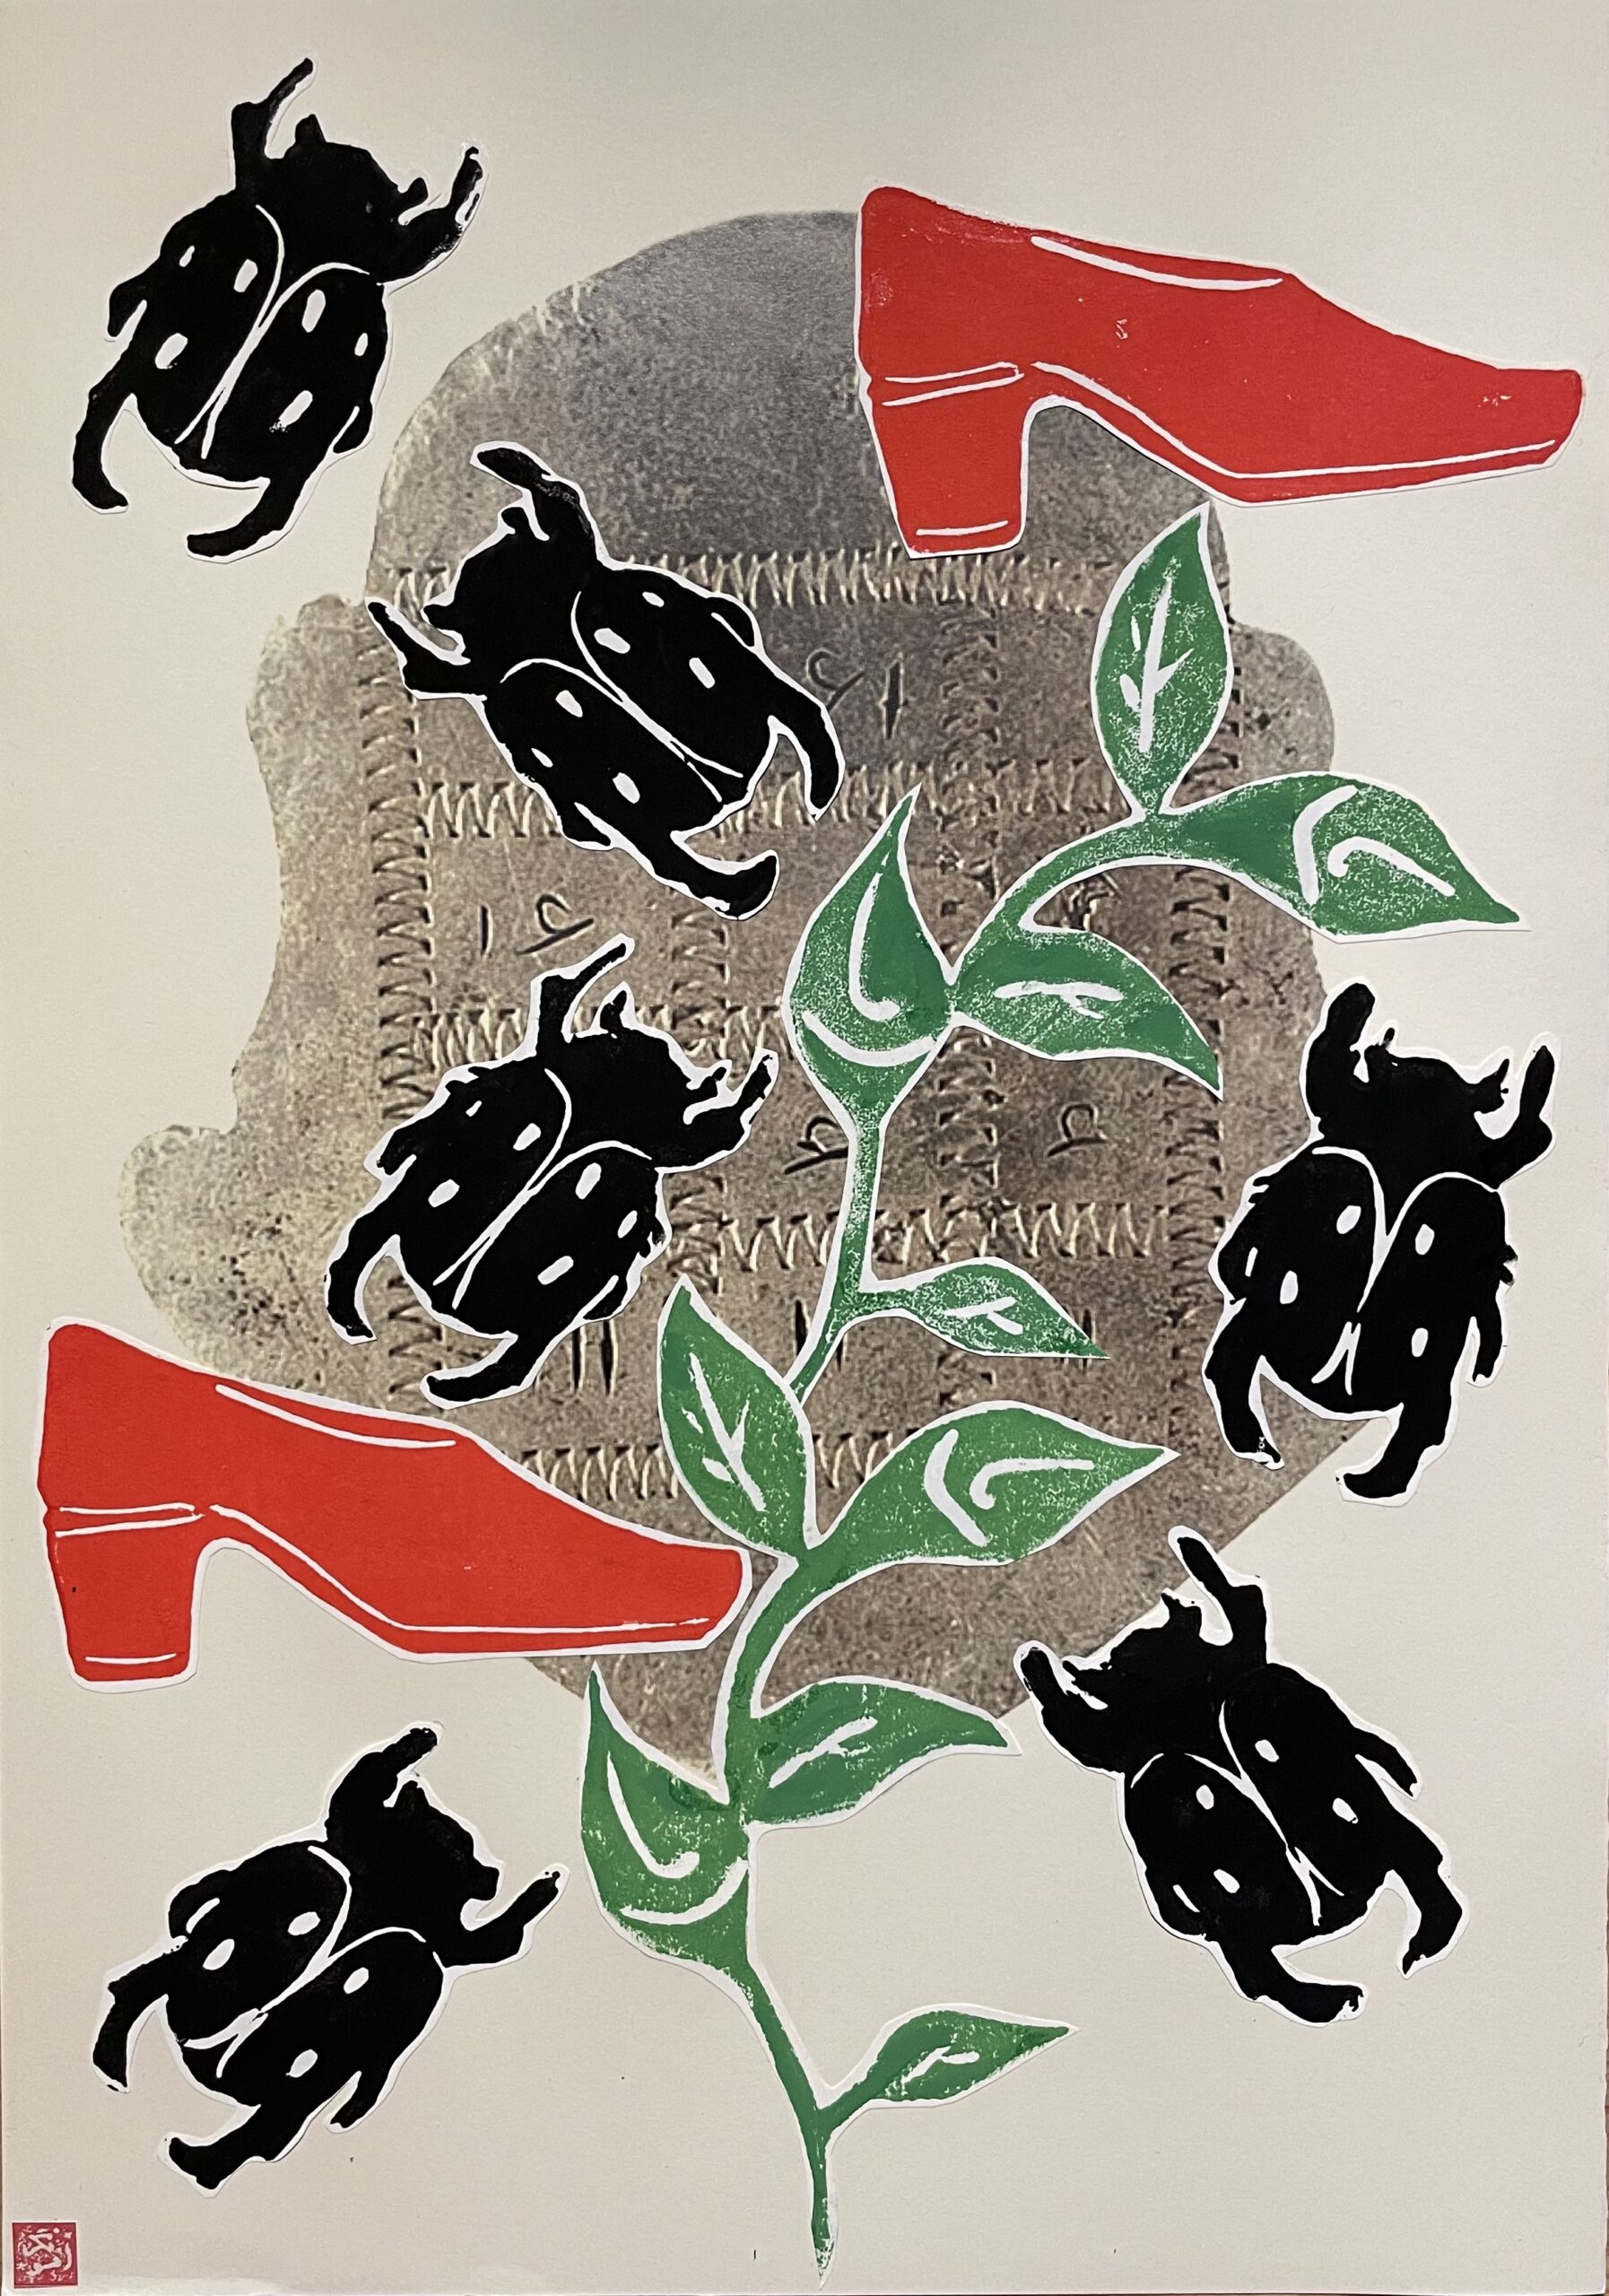 "Red Shoes," a linocut print layered with collage by Iranian artist Afsoon